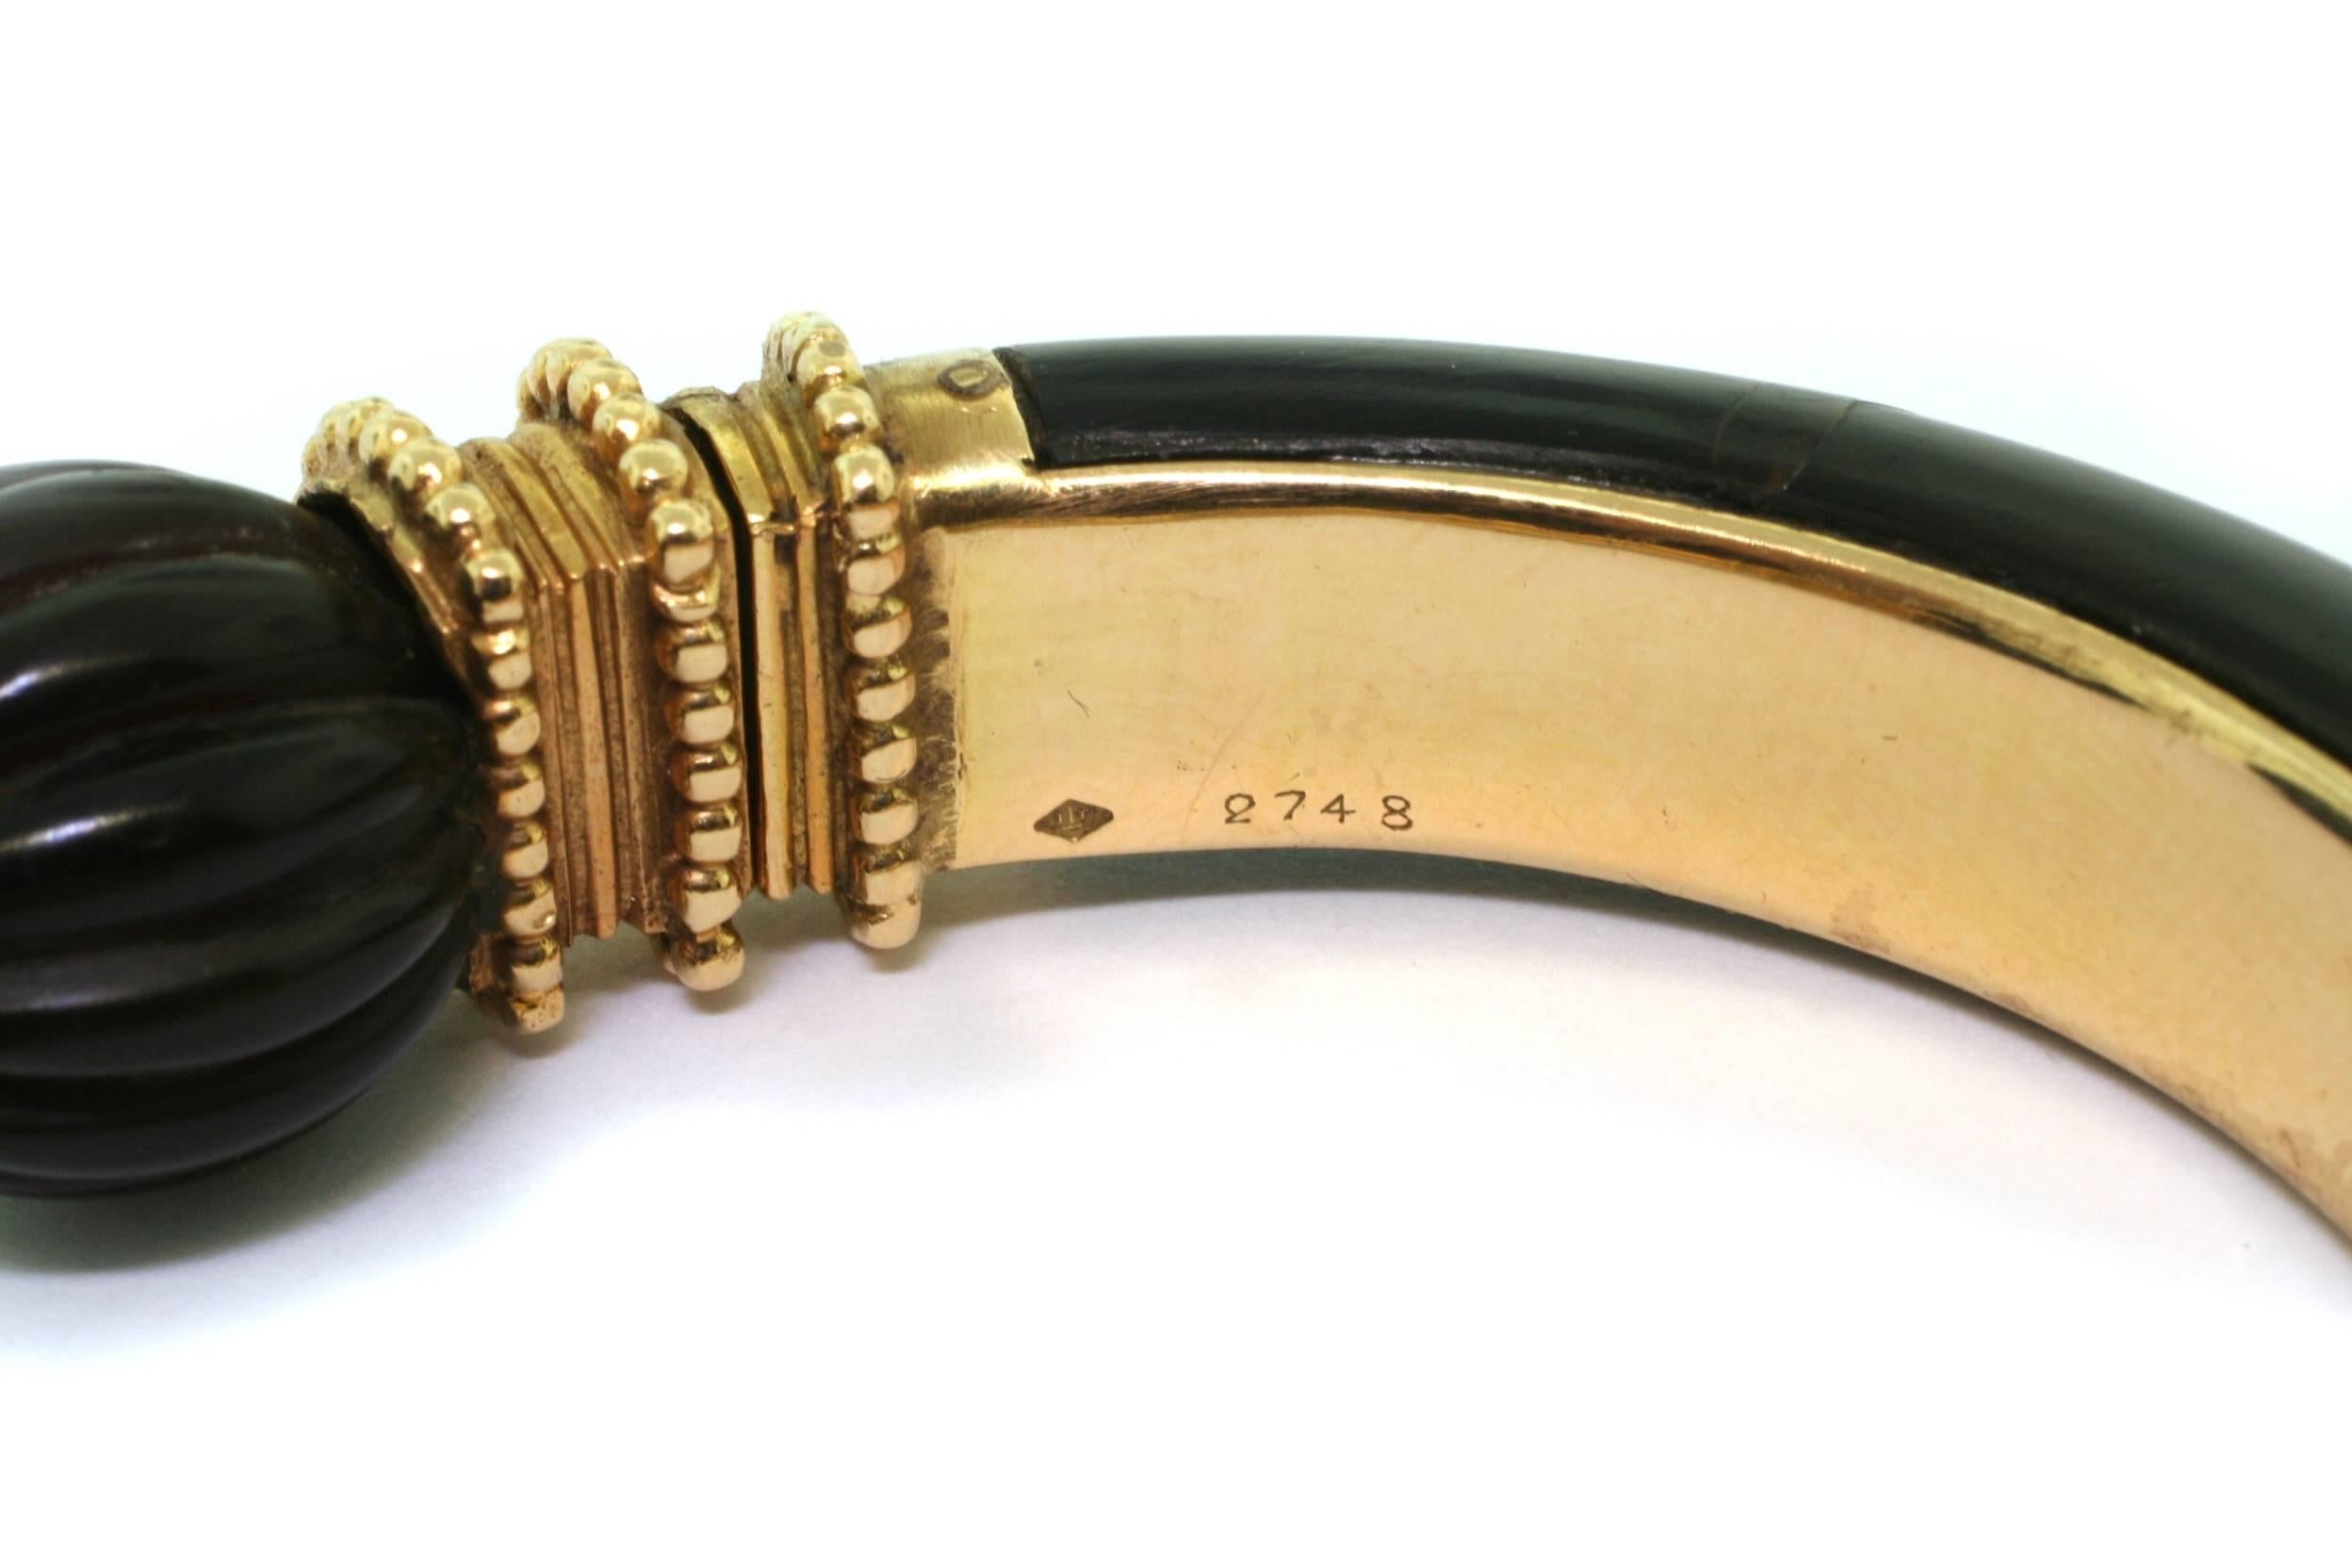 Tiger Eye, Wood and Gold

Each terminal of the ivory bangle is decorated with a carved wood boule and hinged 18 carat beaded yellow gold band
 
Boucheron is a French jewelry house founded in 1858 by Frédéric Boucheron, As  a visionary, in addition